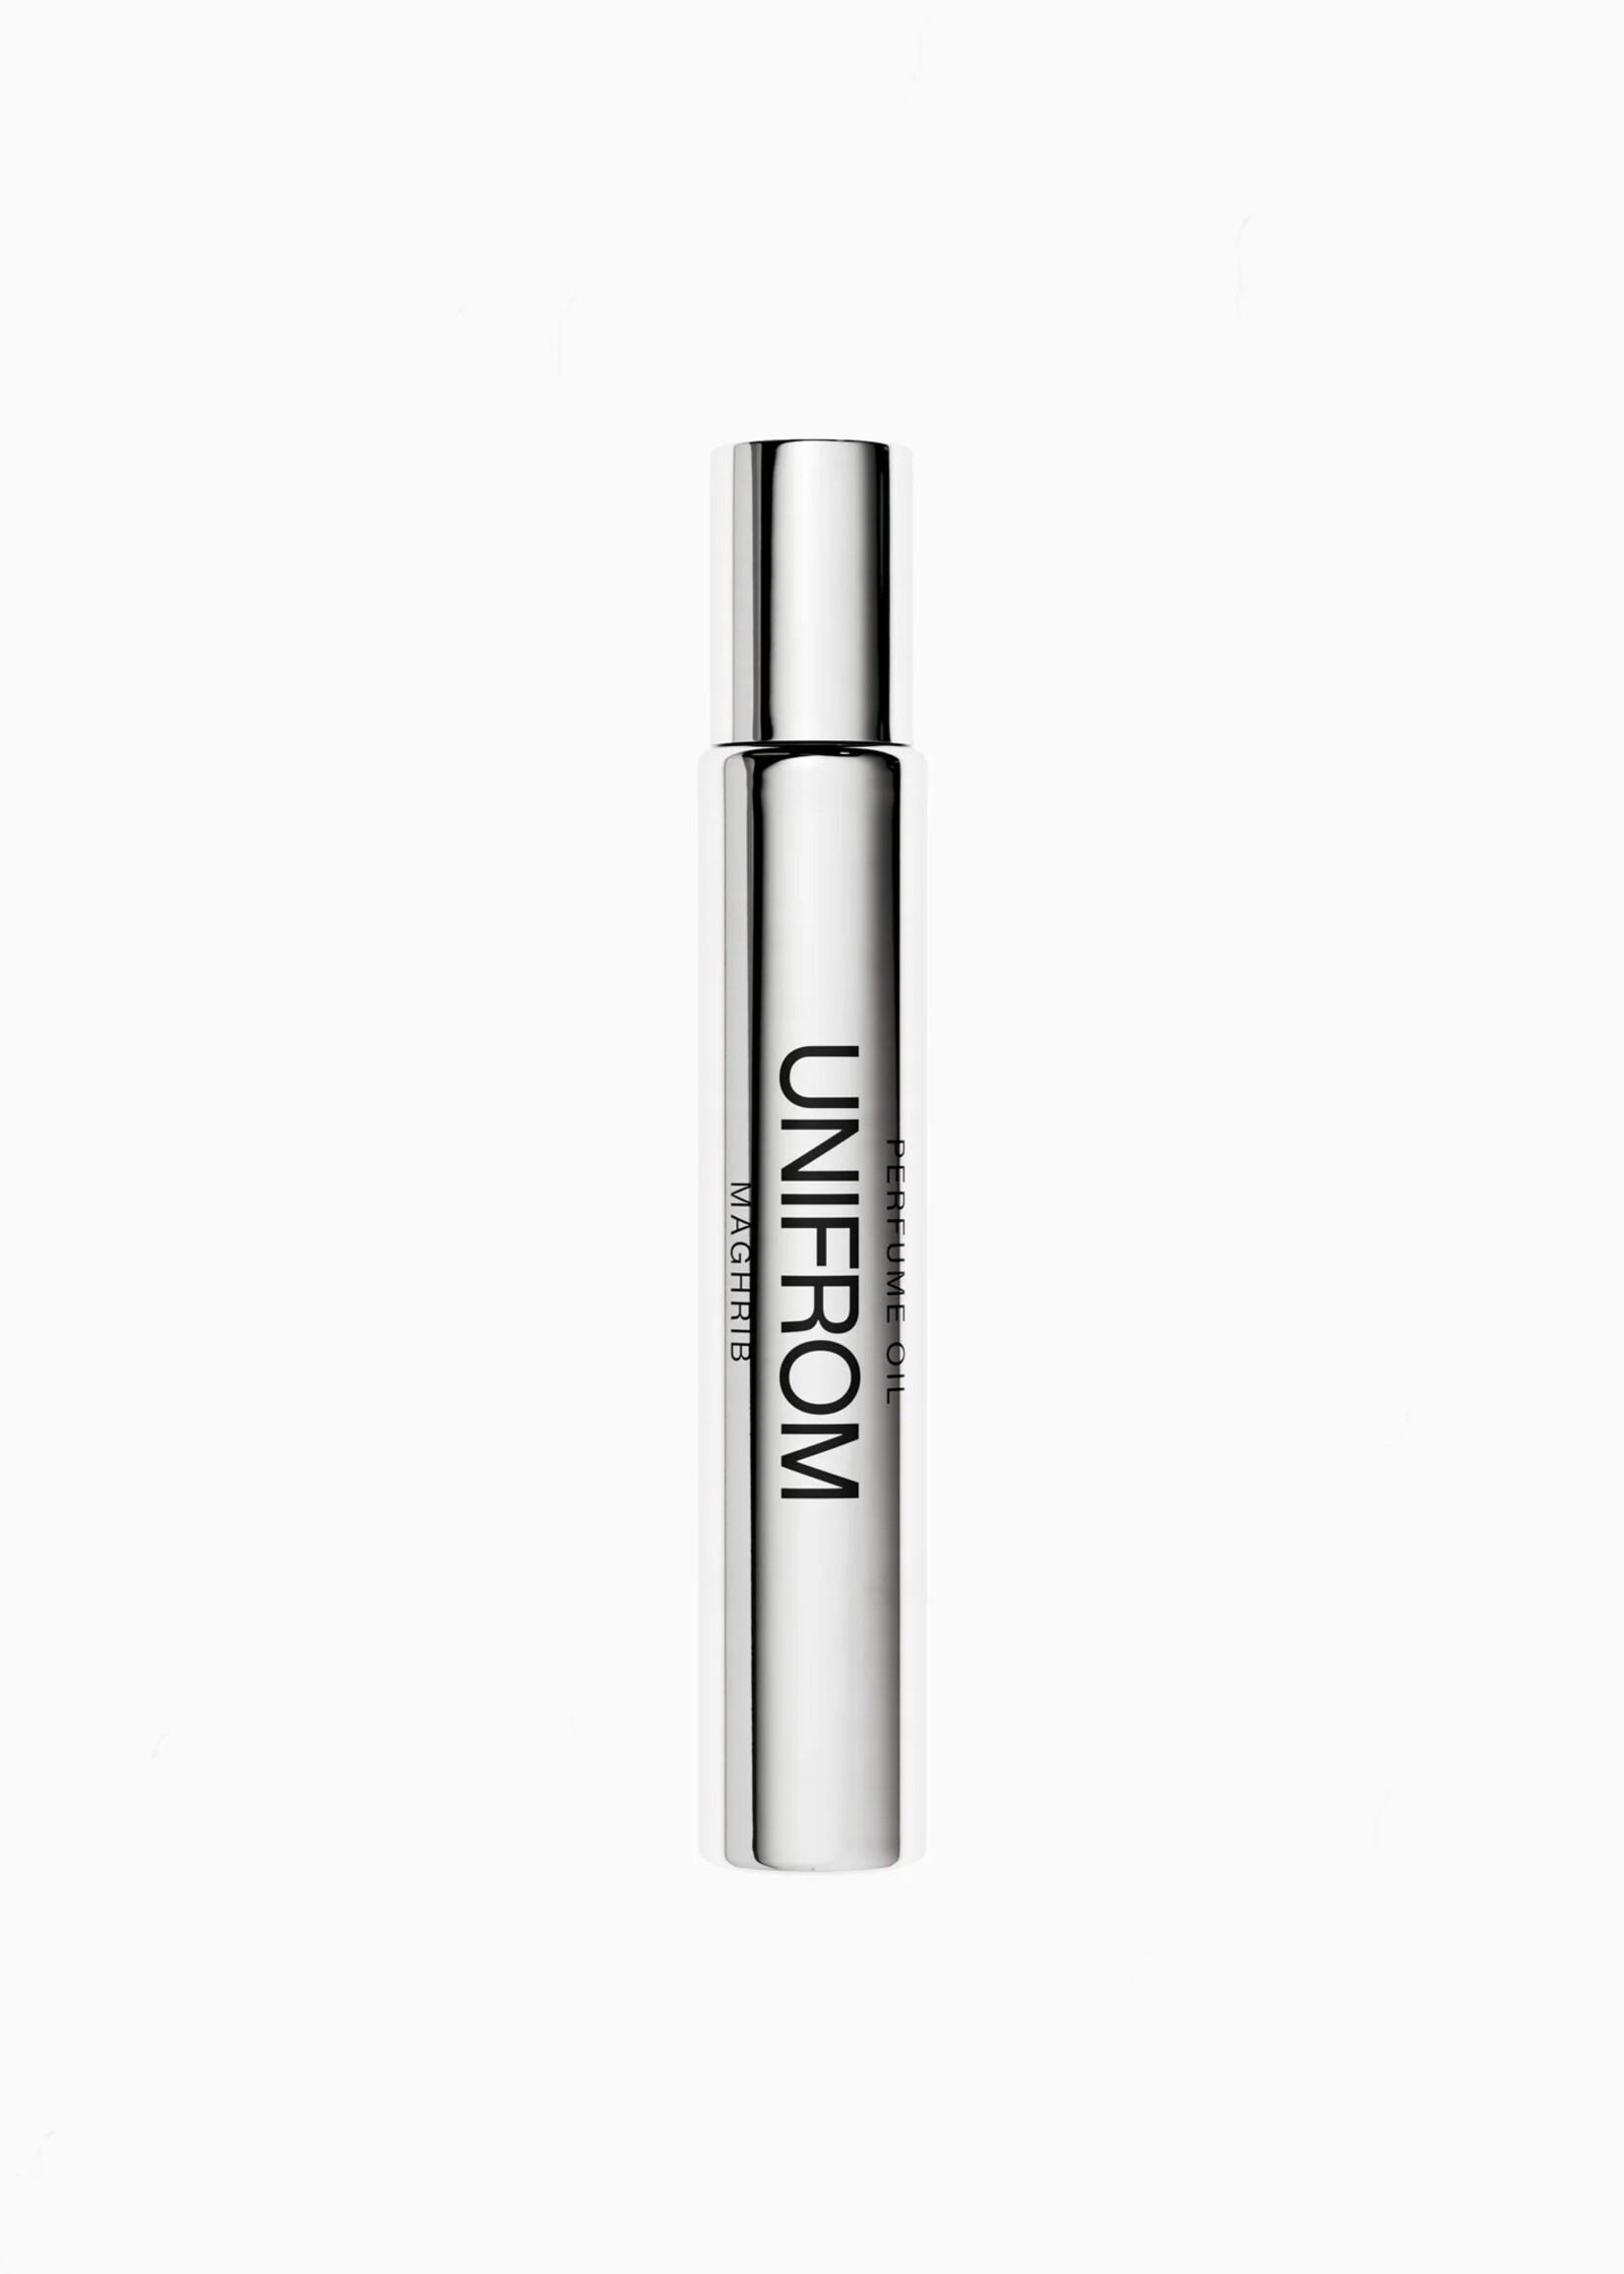 UNIFROM MAGHRIB Roll-on Perfume Oil 10ml